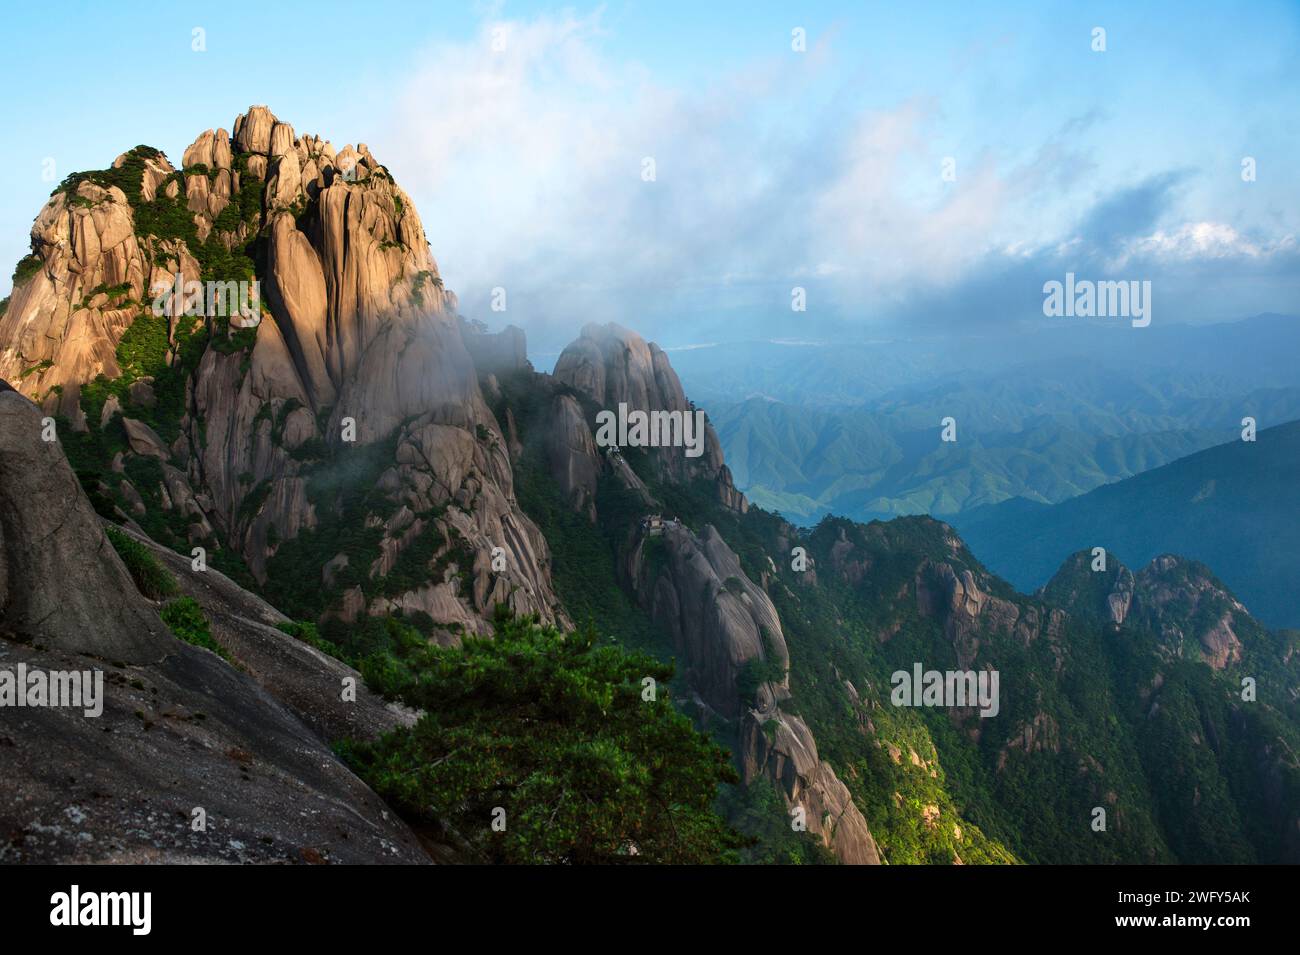 Lotus Peak, also known as Lianhua Feng, stands at 6,115 feet as the tallest summit in the Huangshan mountain range in China. Stock Photo